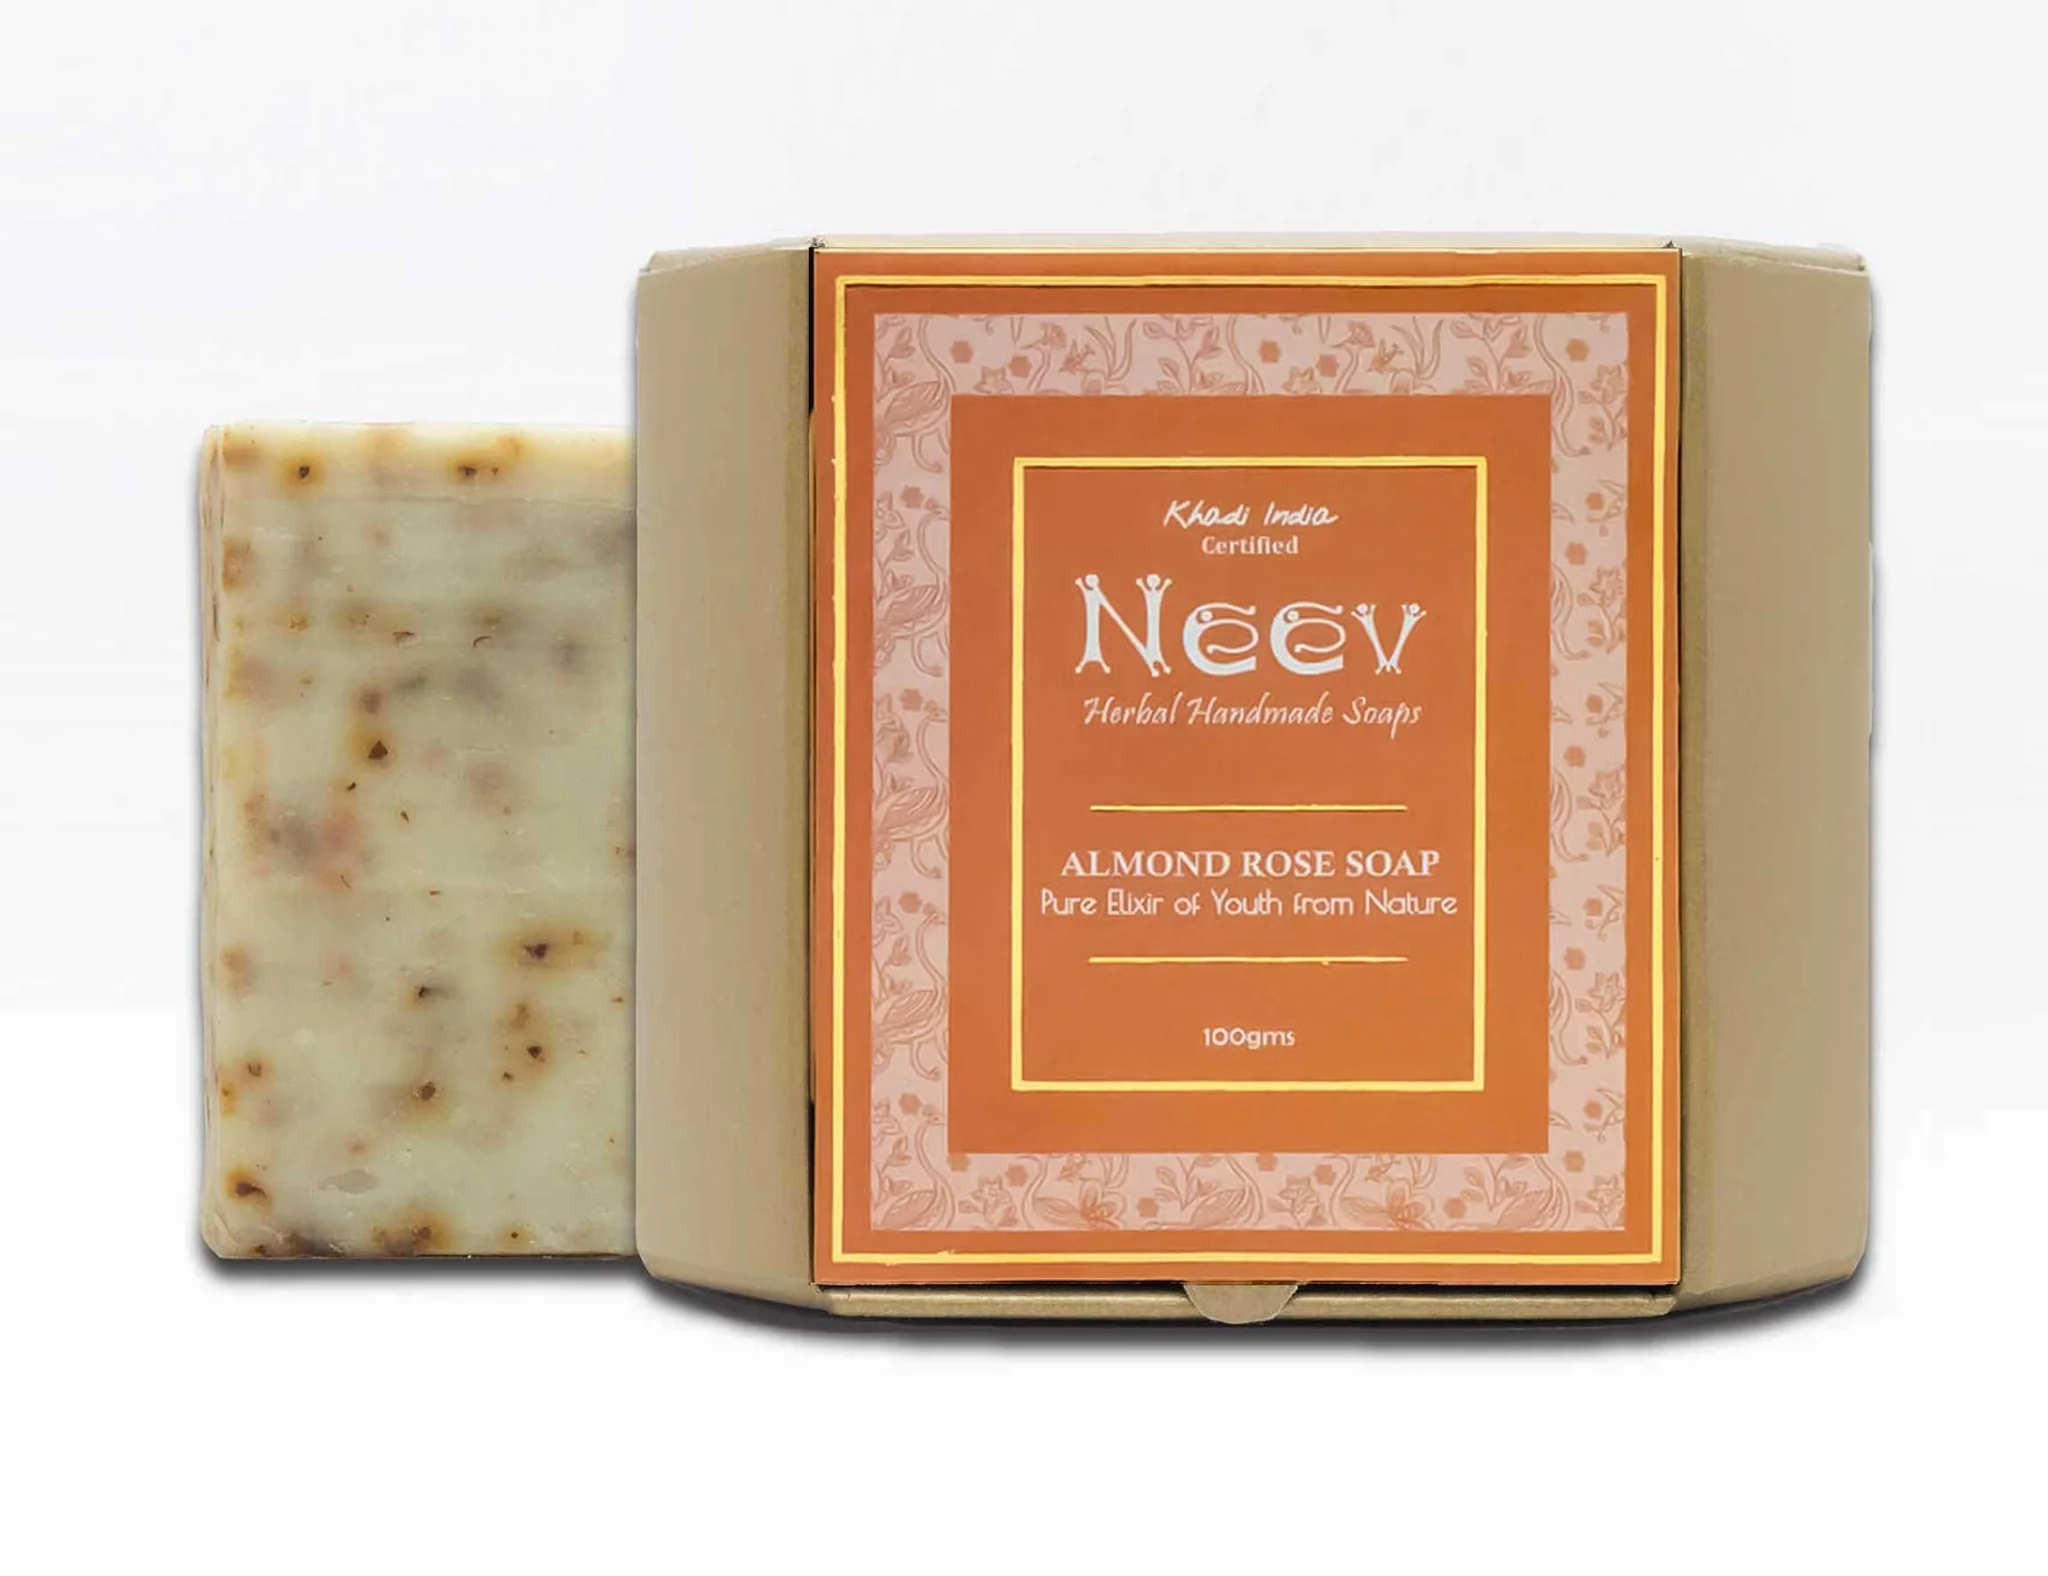 Neev Almond Rose Handmade Soap- Pure Elixir of Youth from Nature